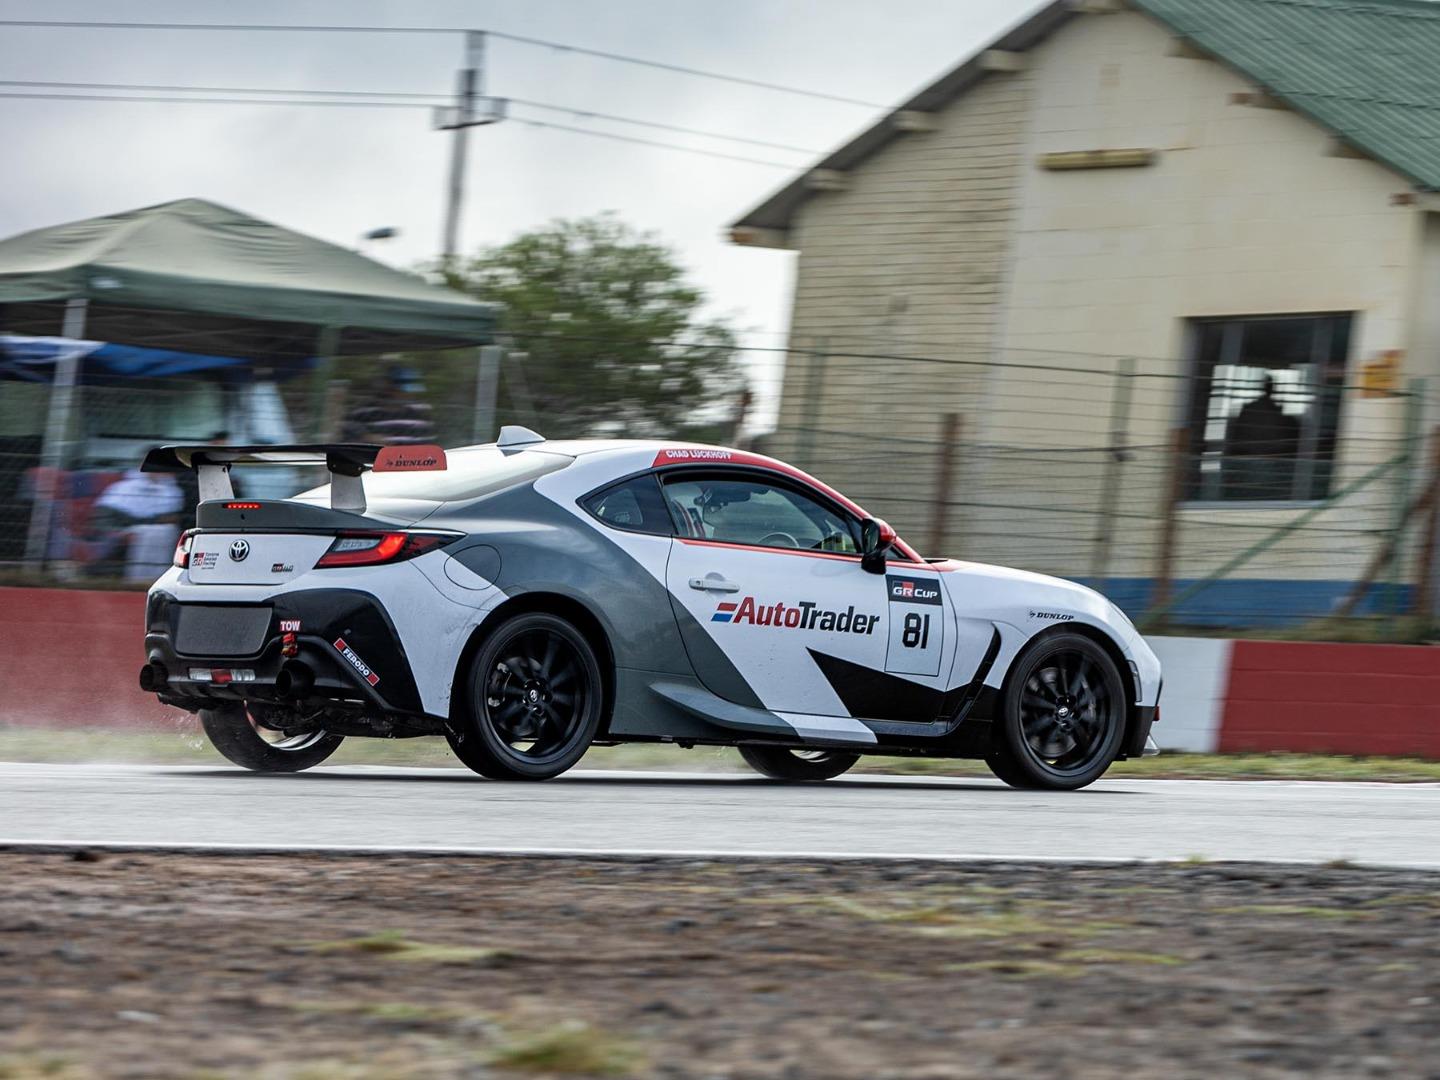 toyota gr cup at extreme festival nationals - how to lose the lead